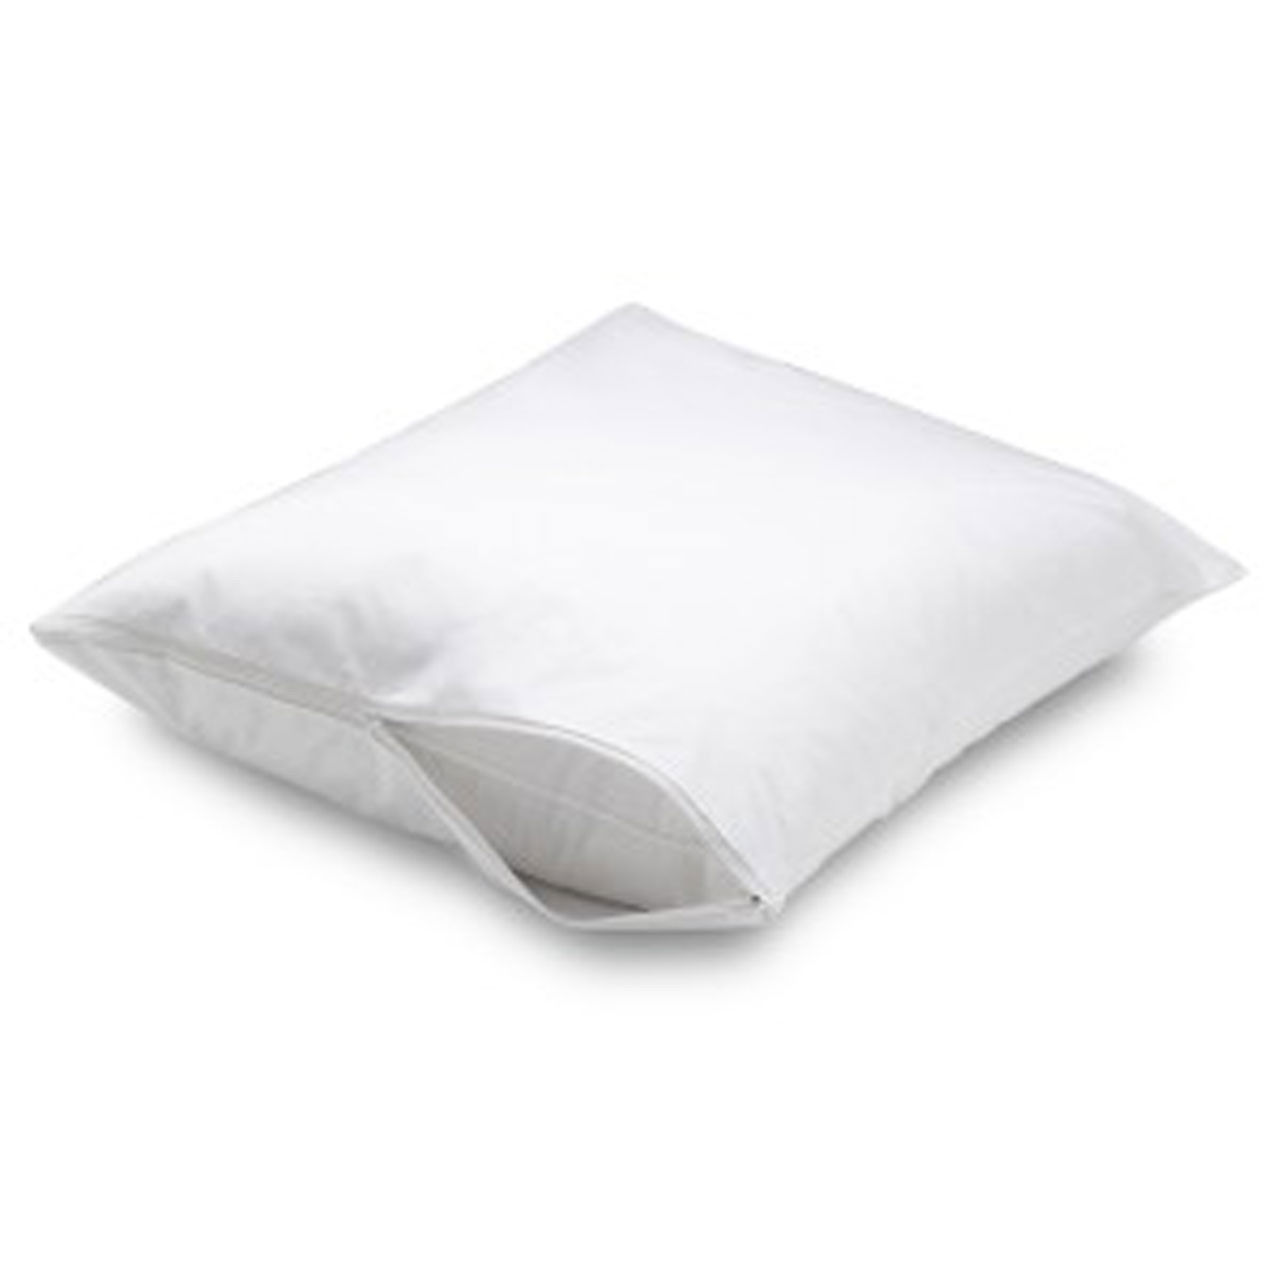 Do the bulk pillow protectors ship from the same location as the Woven Zippered ones?